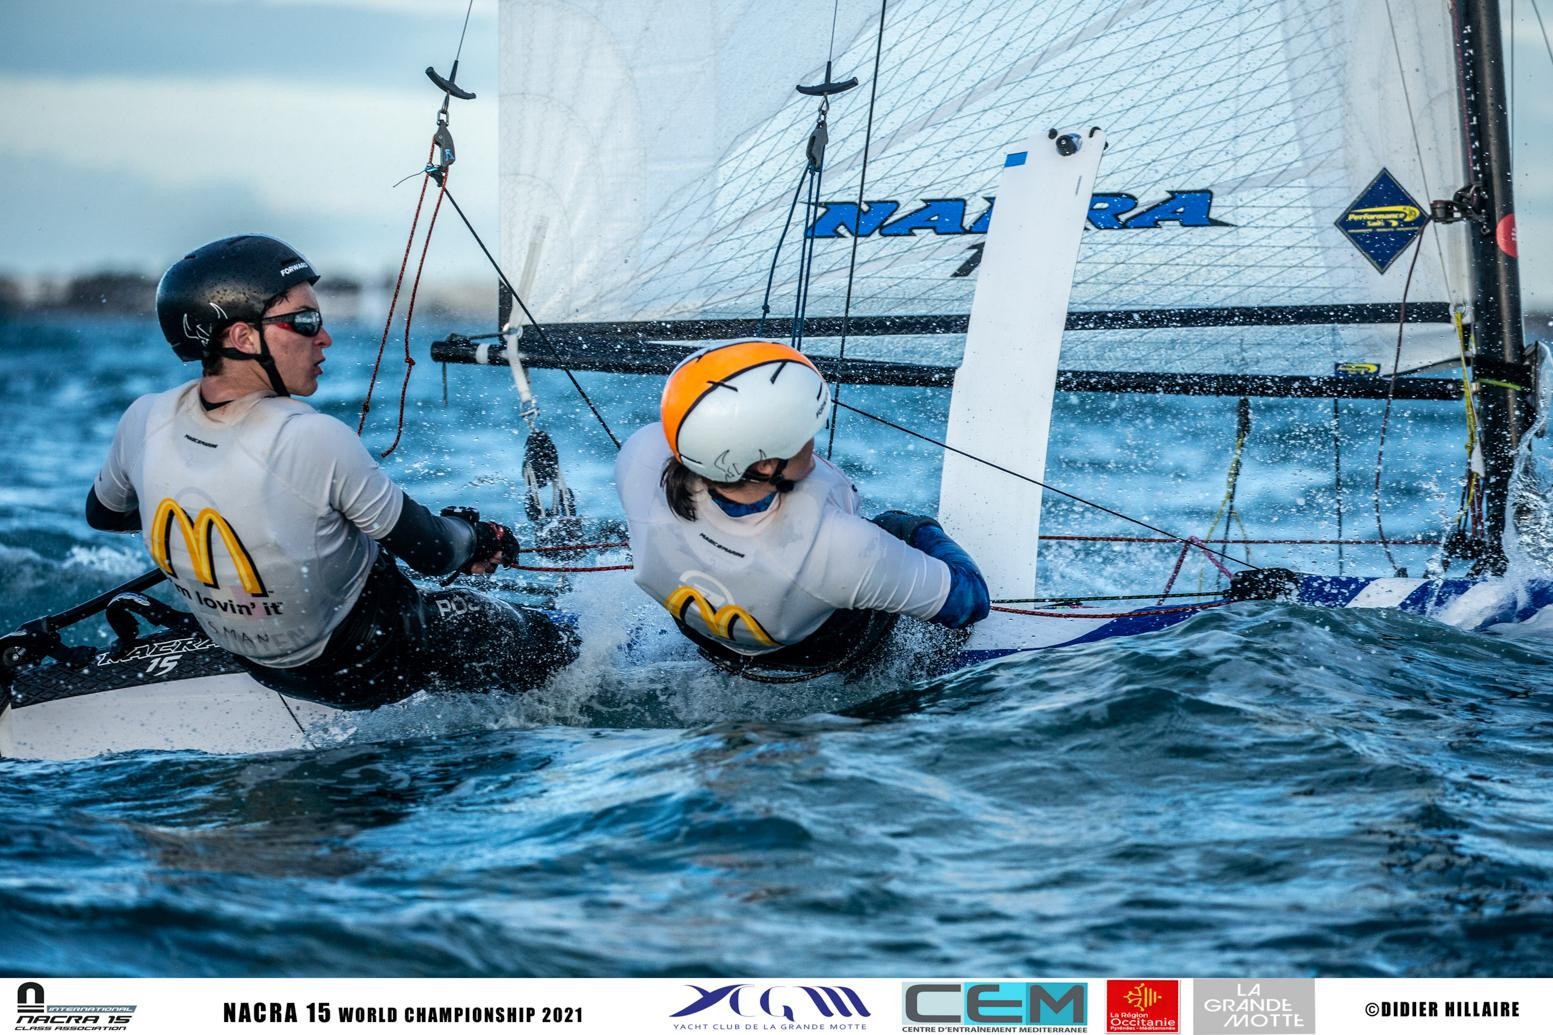 A full day of action at the Nacra 15 World Championships